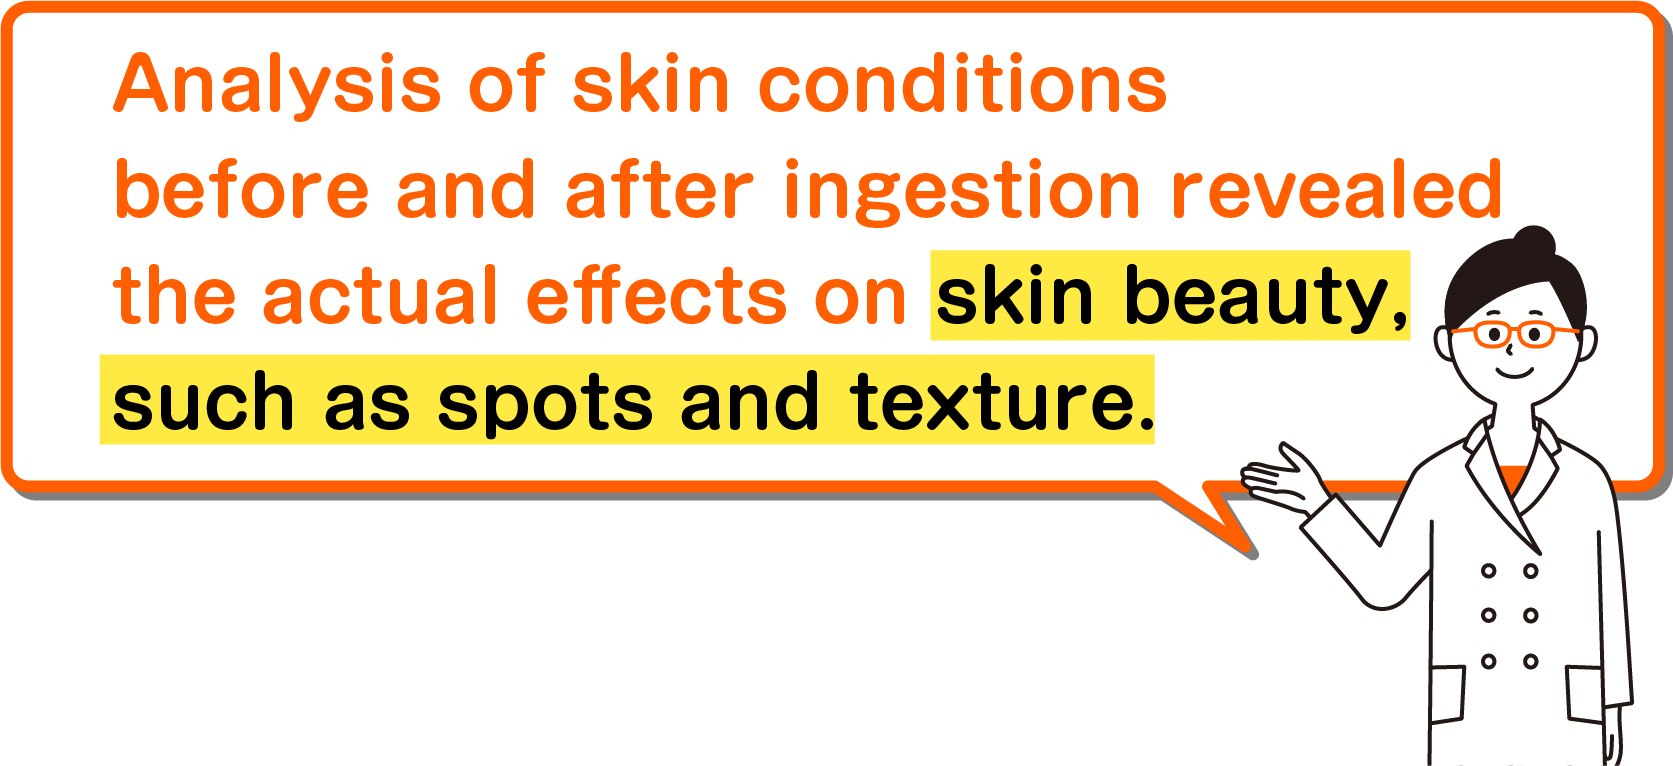 Analysis of skin conditions before and after ingestion revealed the actual effects on skin beauty, such as spots and texture.